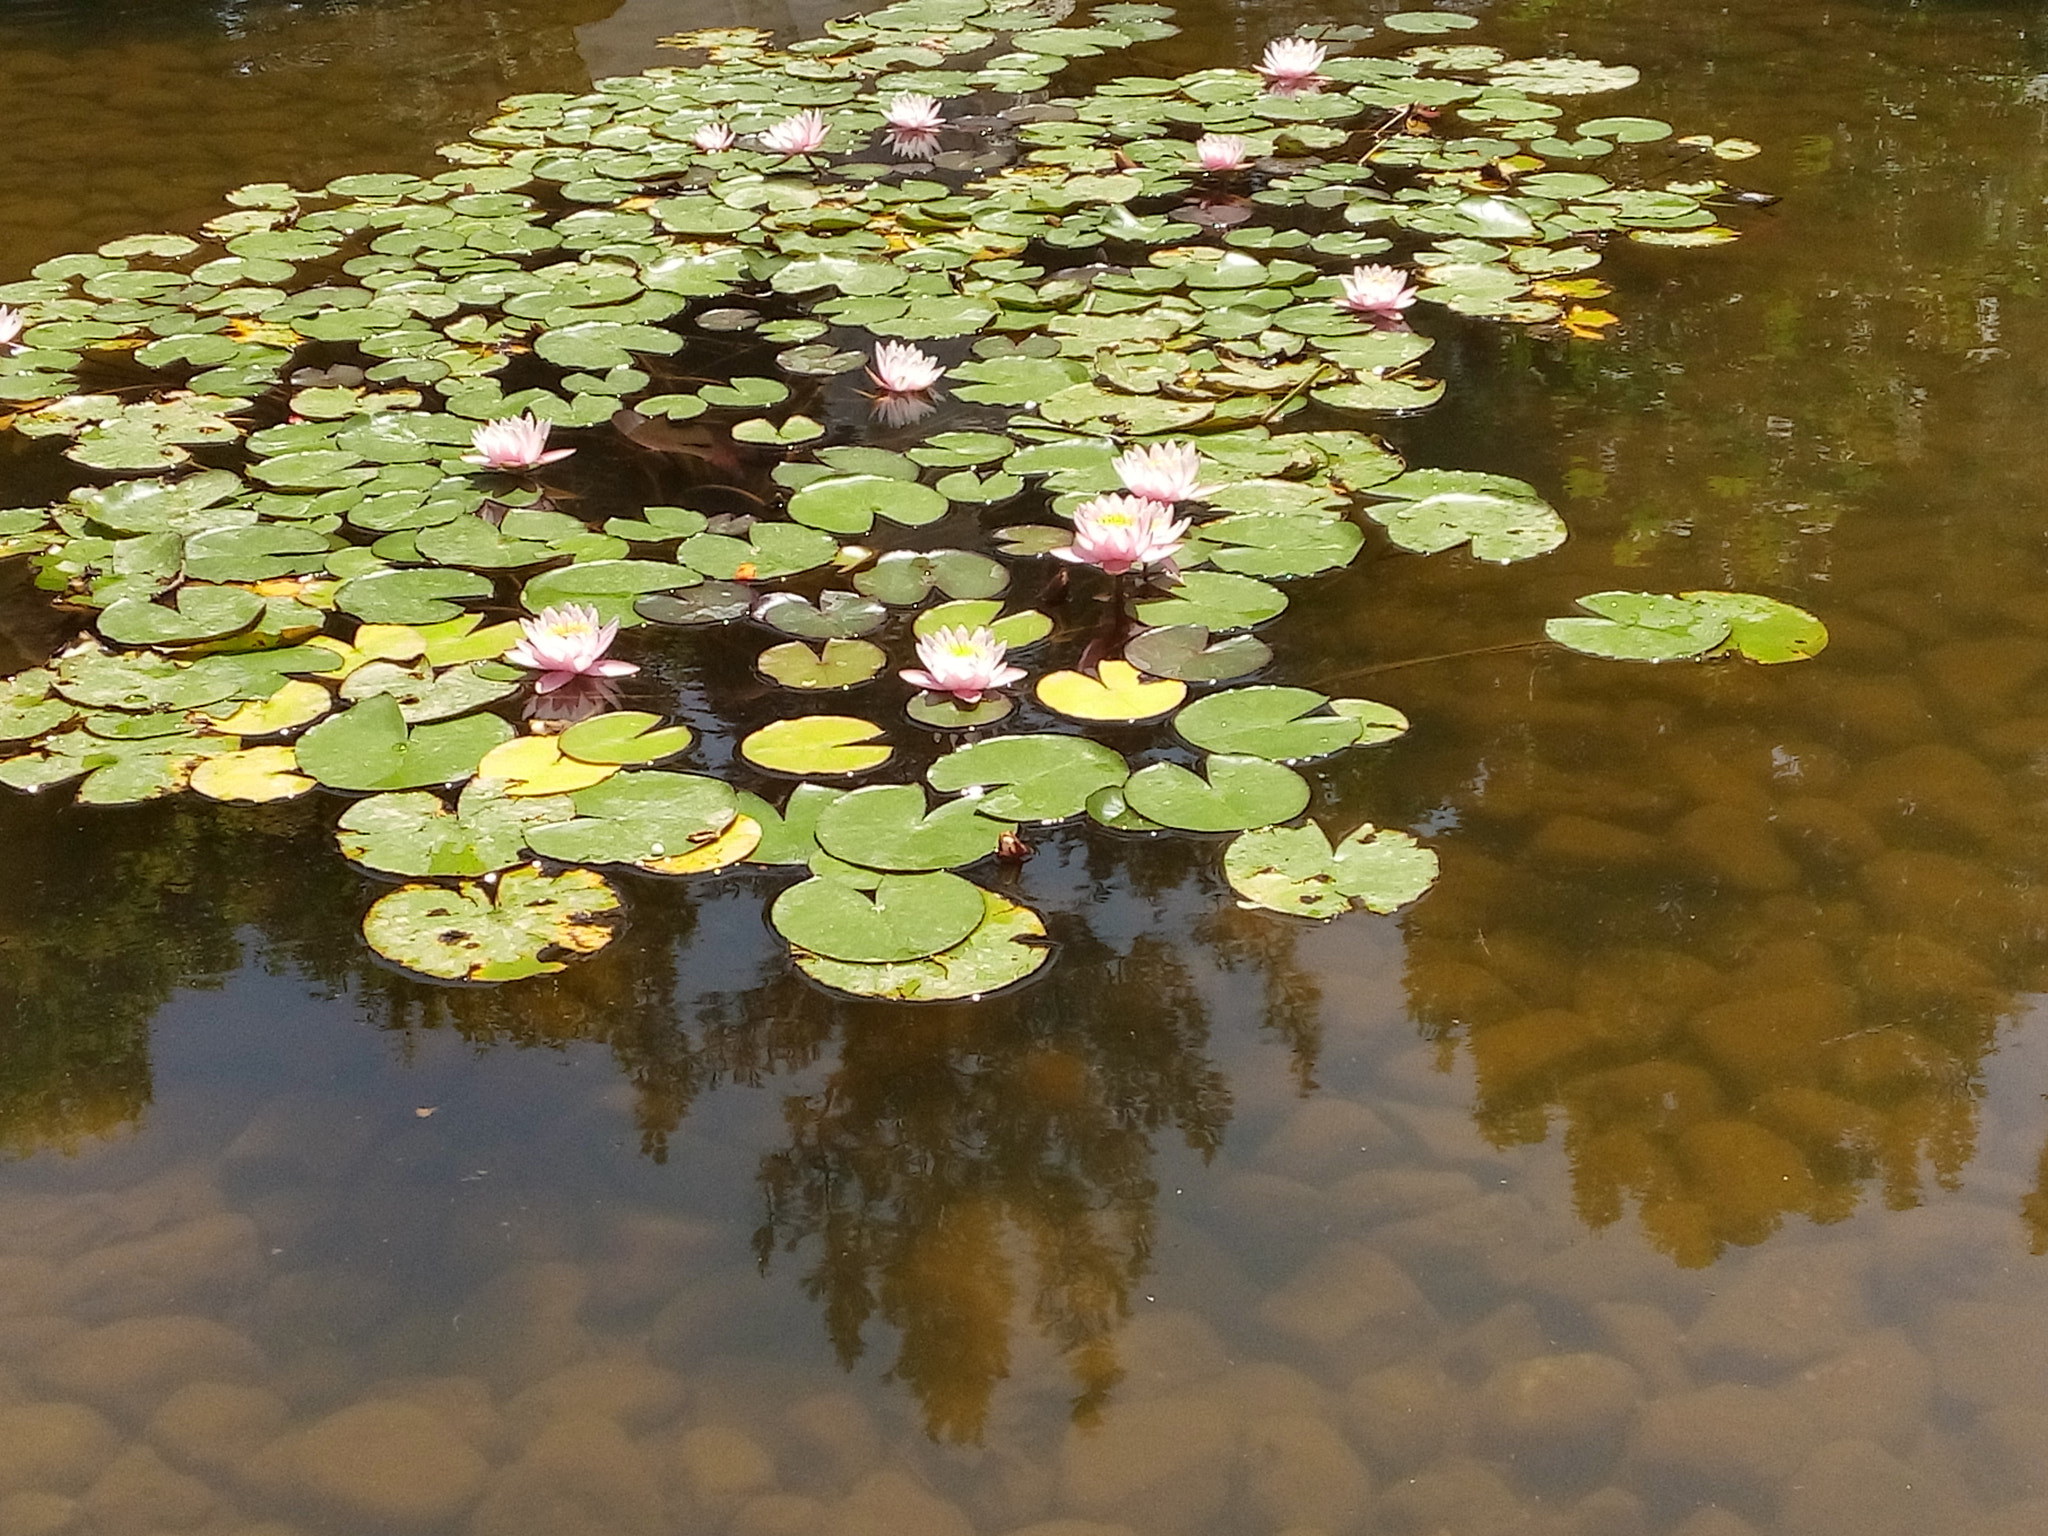 LG L Bello sample photo. Water-lily photography